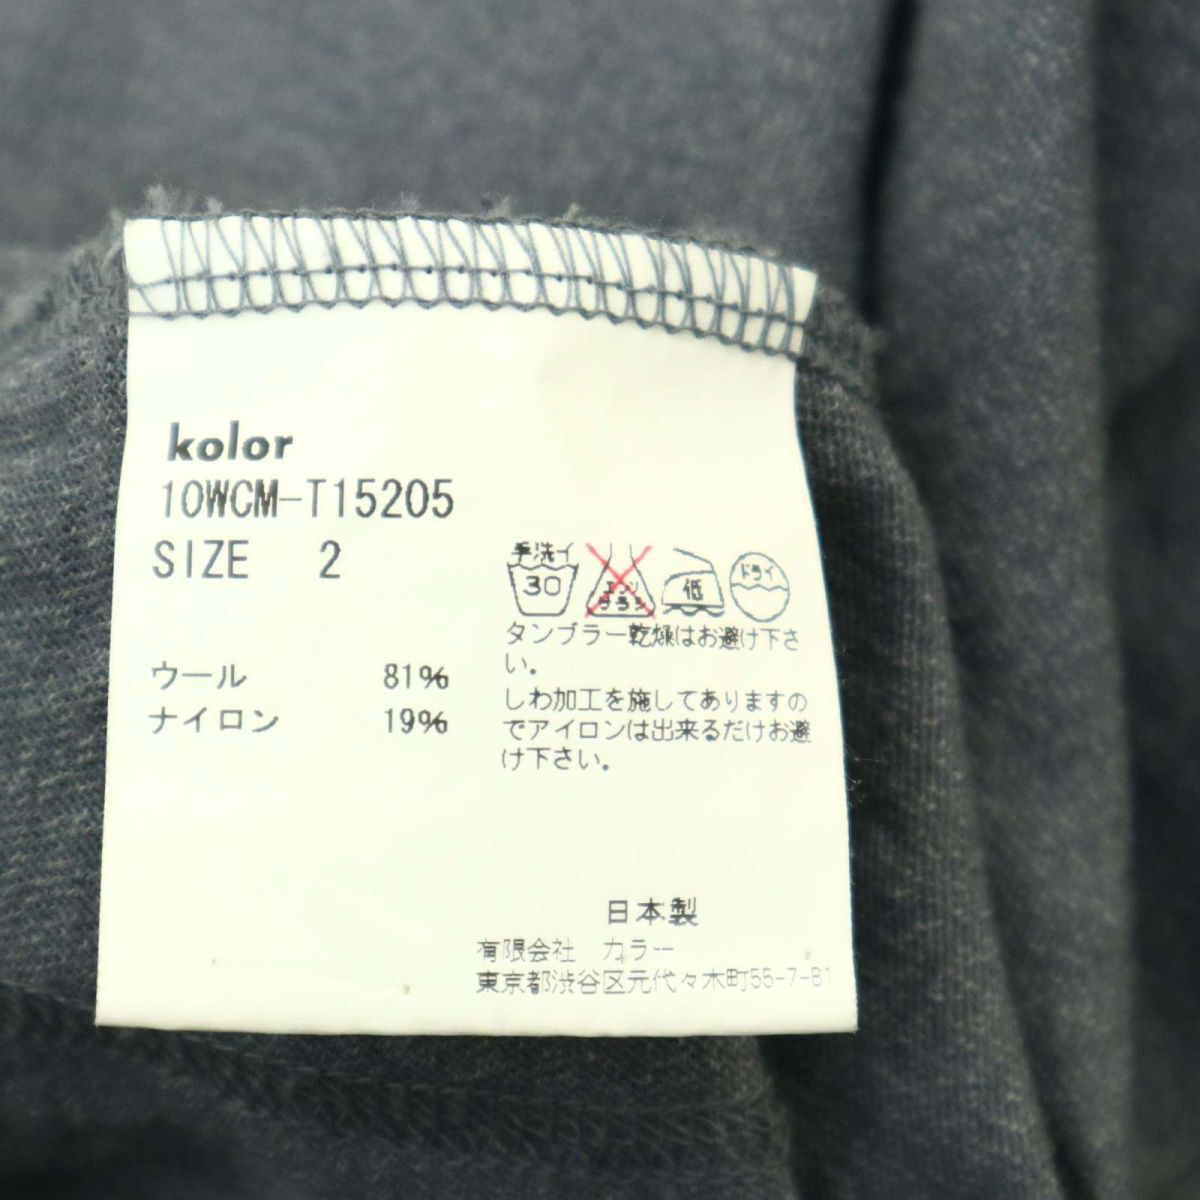 kolor color autumn winter cut off * wool knitted jacket cardigan feather weave Sz.2 men's gray made in Japan A4T02102_2#N